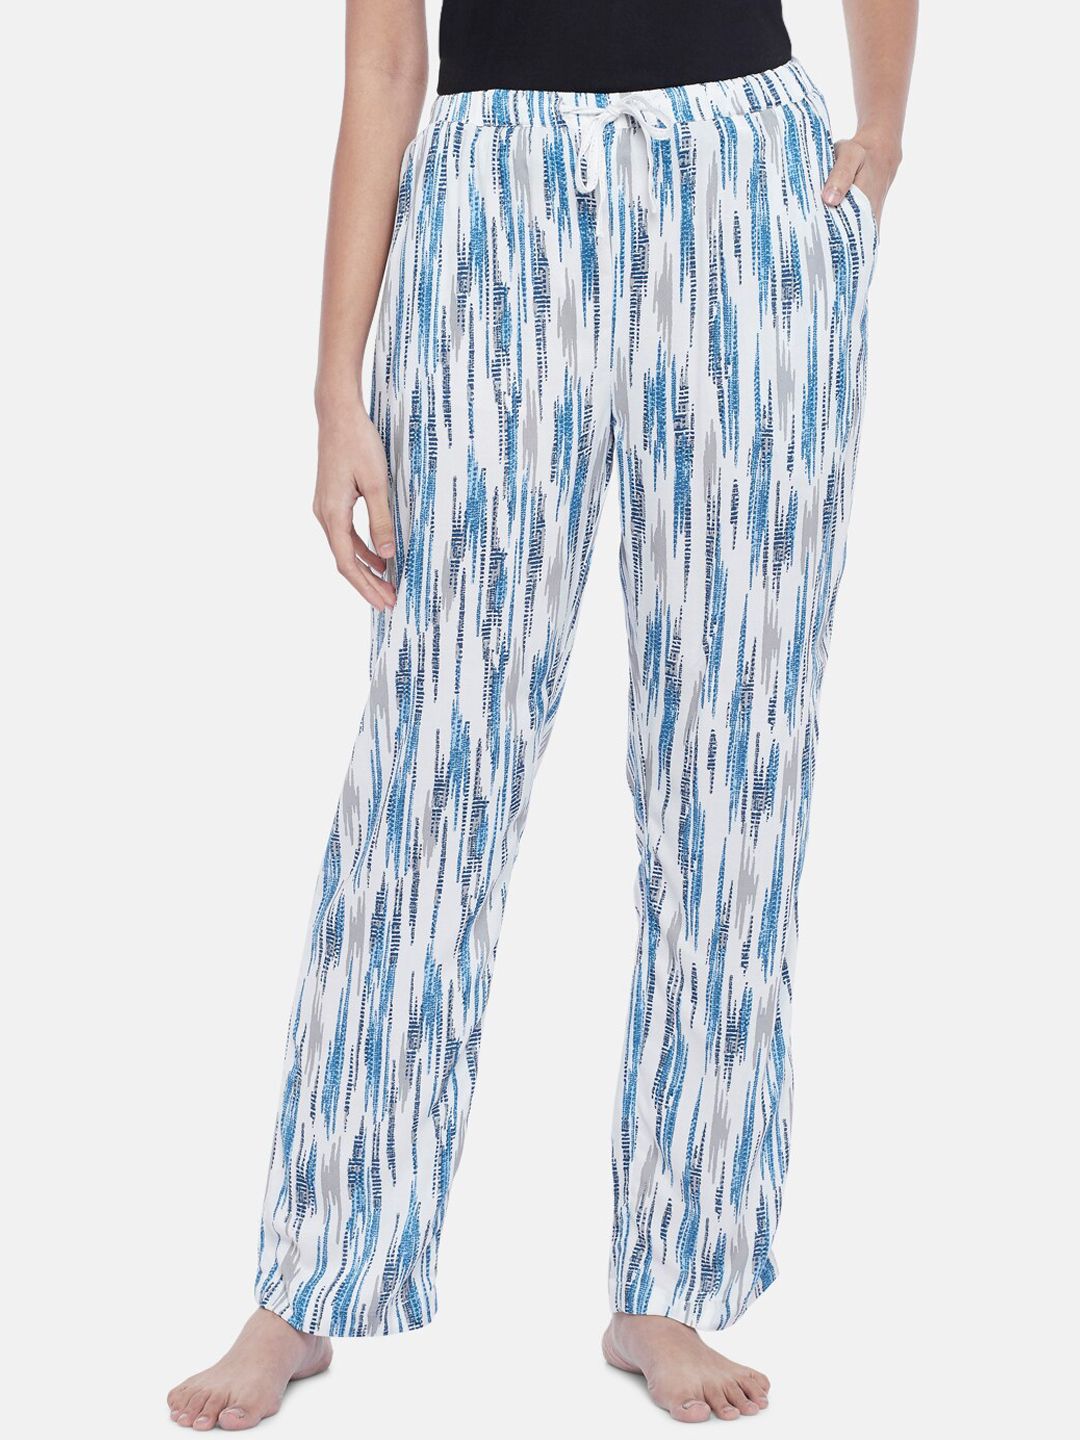 Dreamz by Pantaloons Women Blue & White Abstract Printed Lounge Pants Price in India